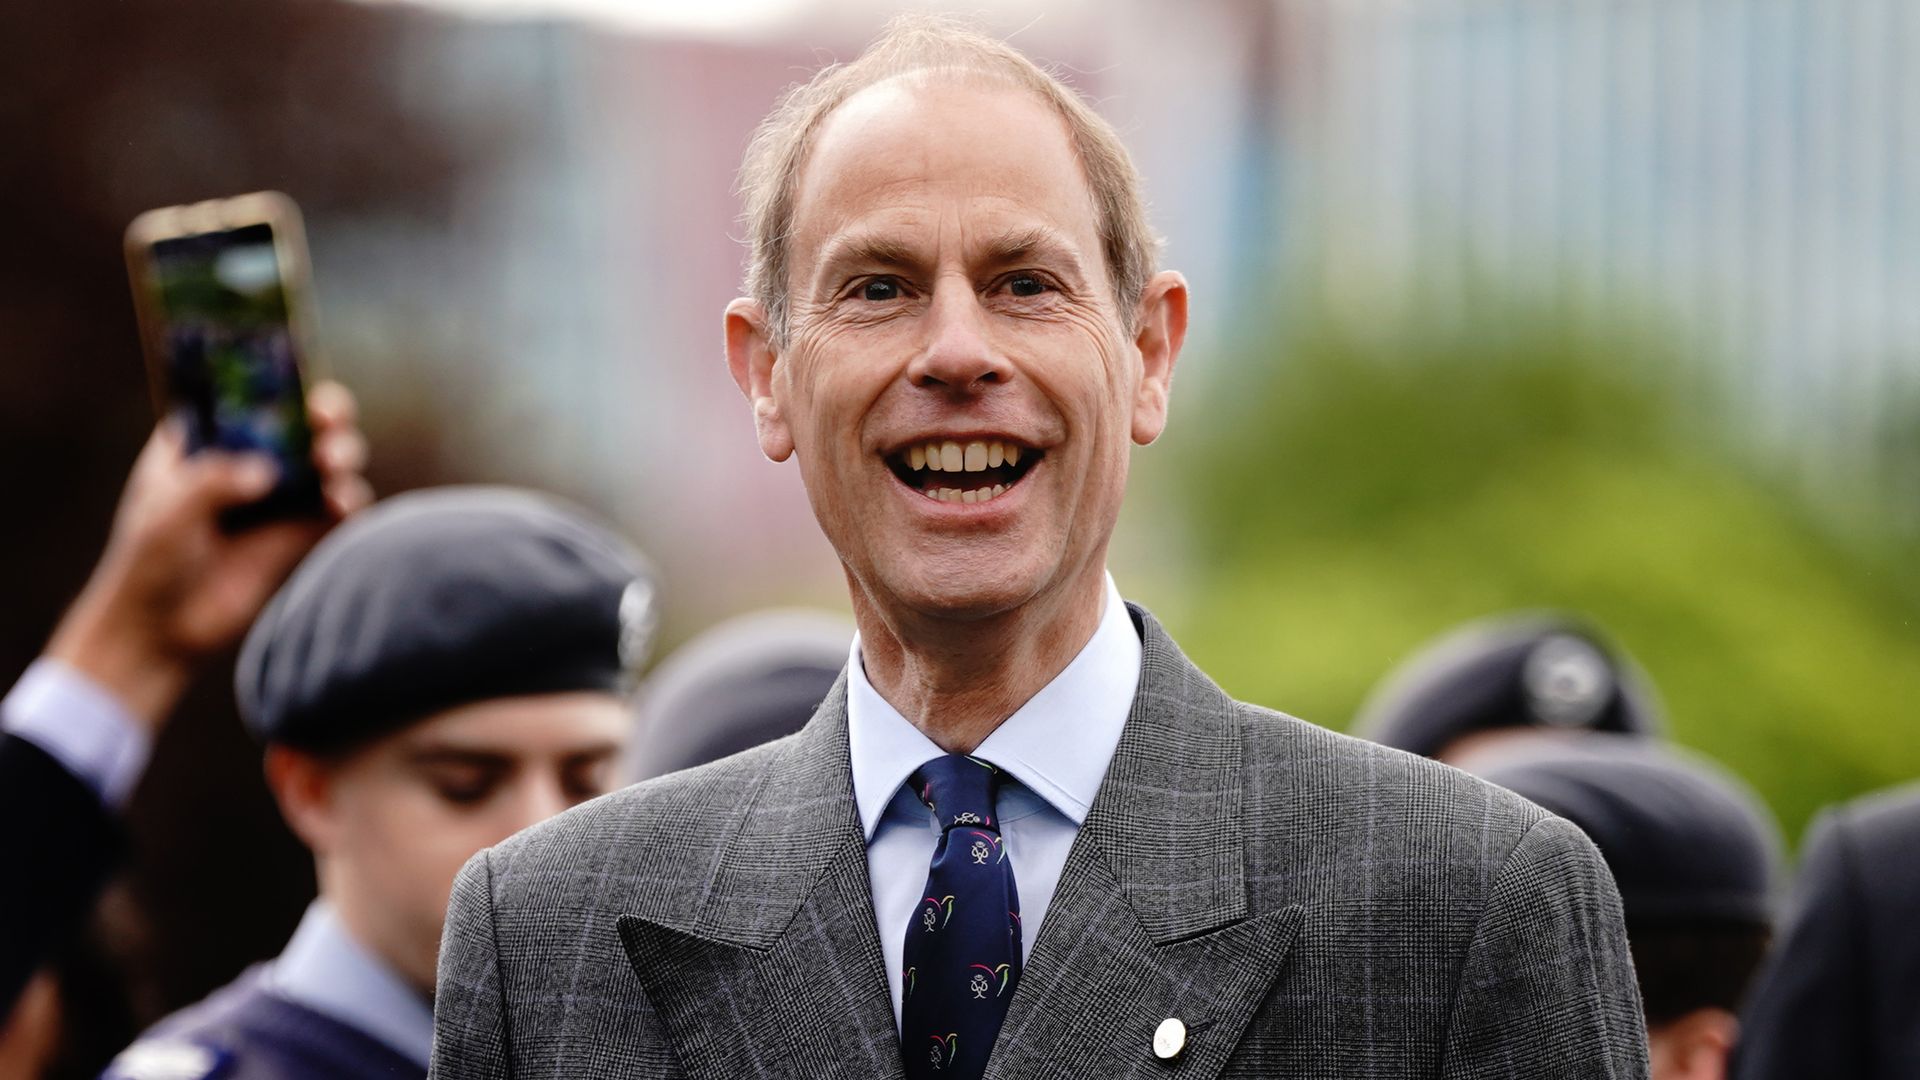 Prince Edward smiling widely in a tweed suit